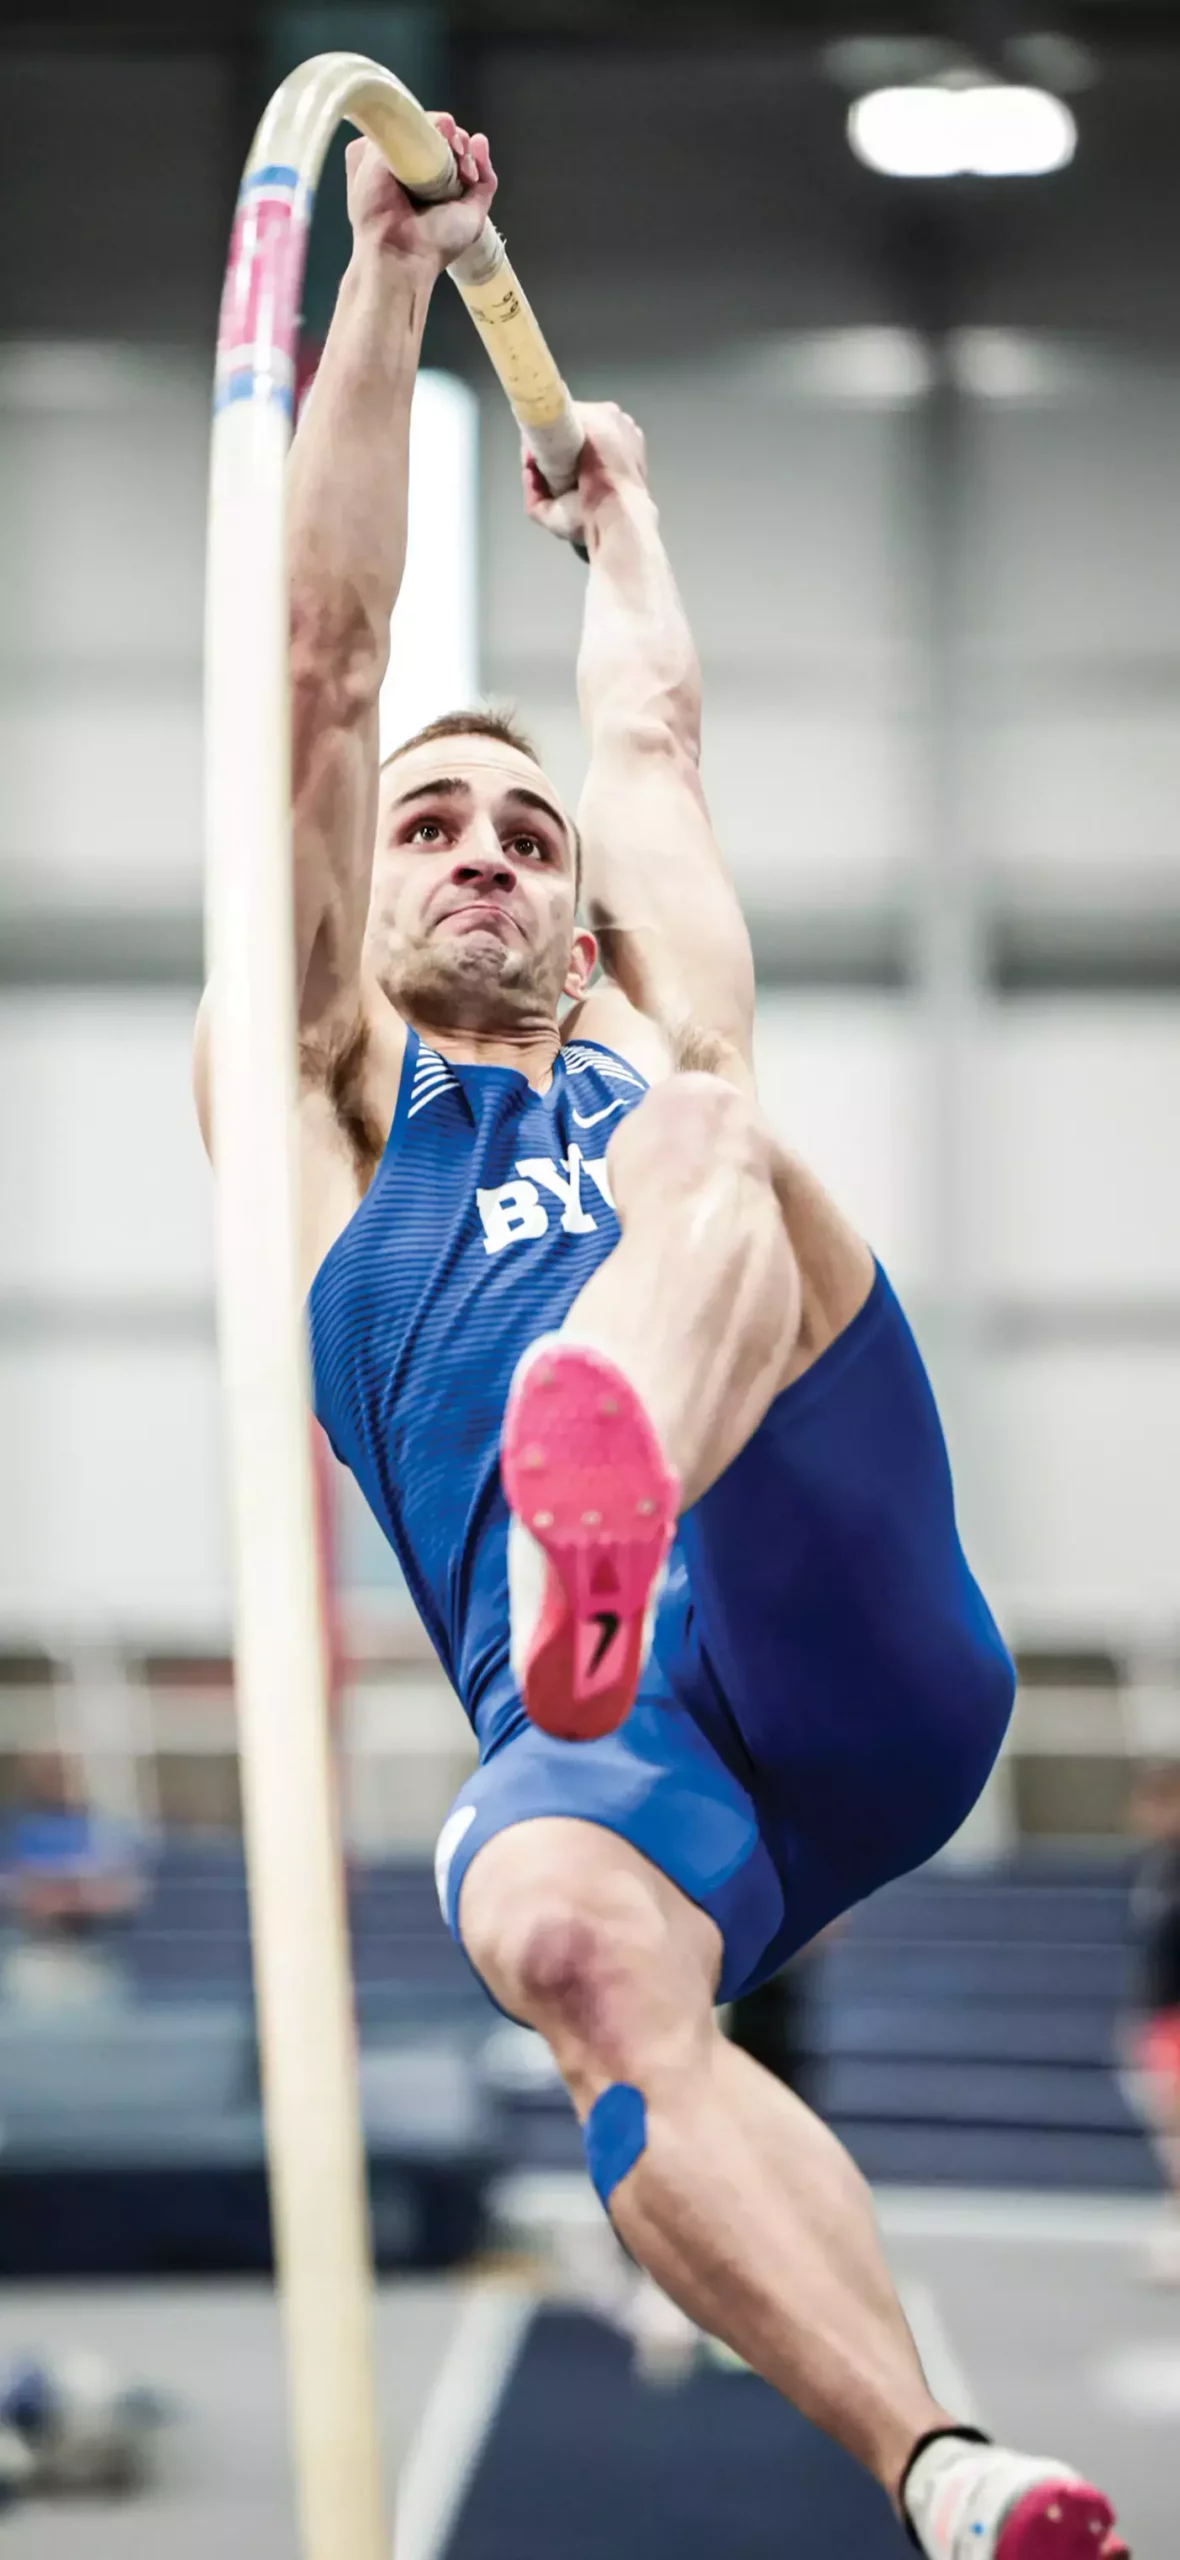 A man launches into the air holding a pole for vaulting.